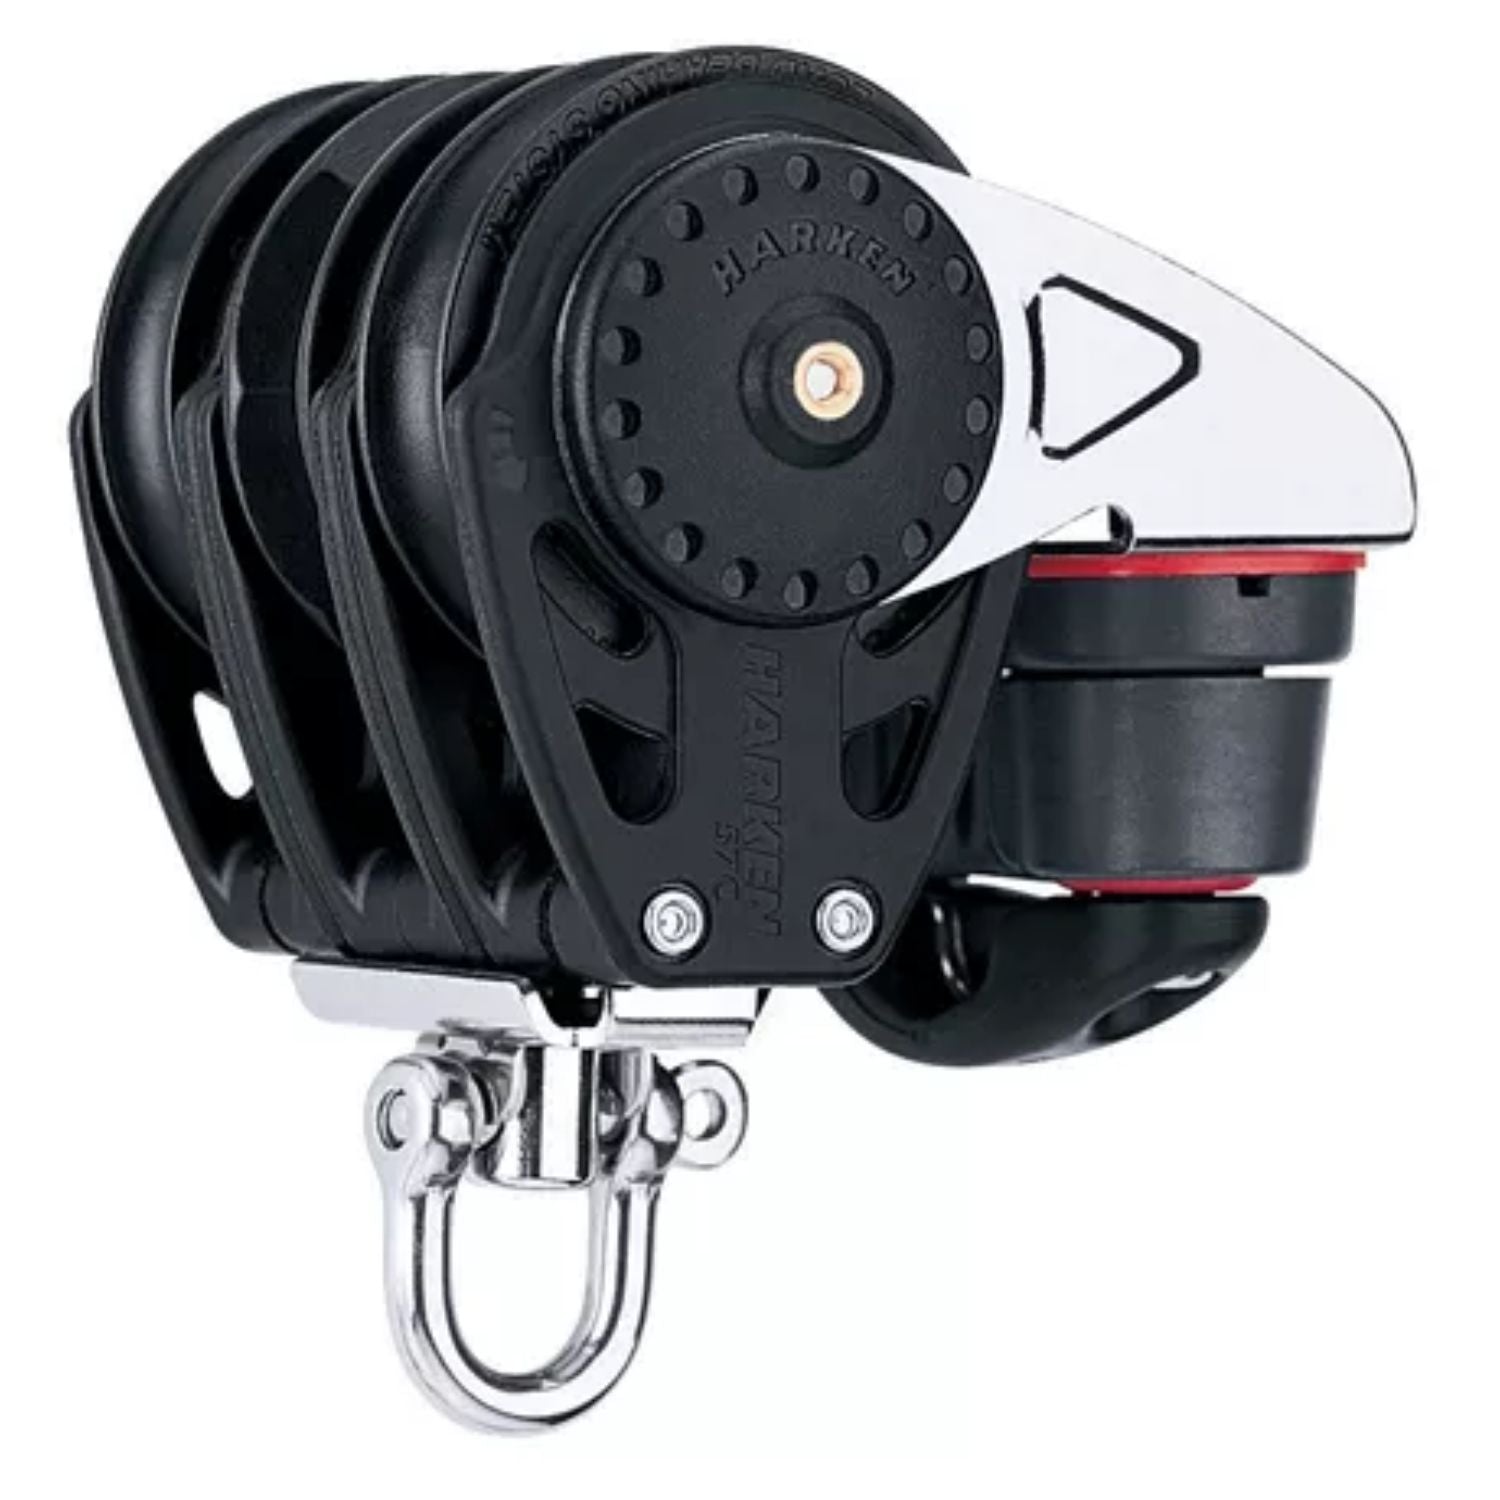 Harken 57mm Carbo Ratchamatic Trippel Camcleat